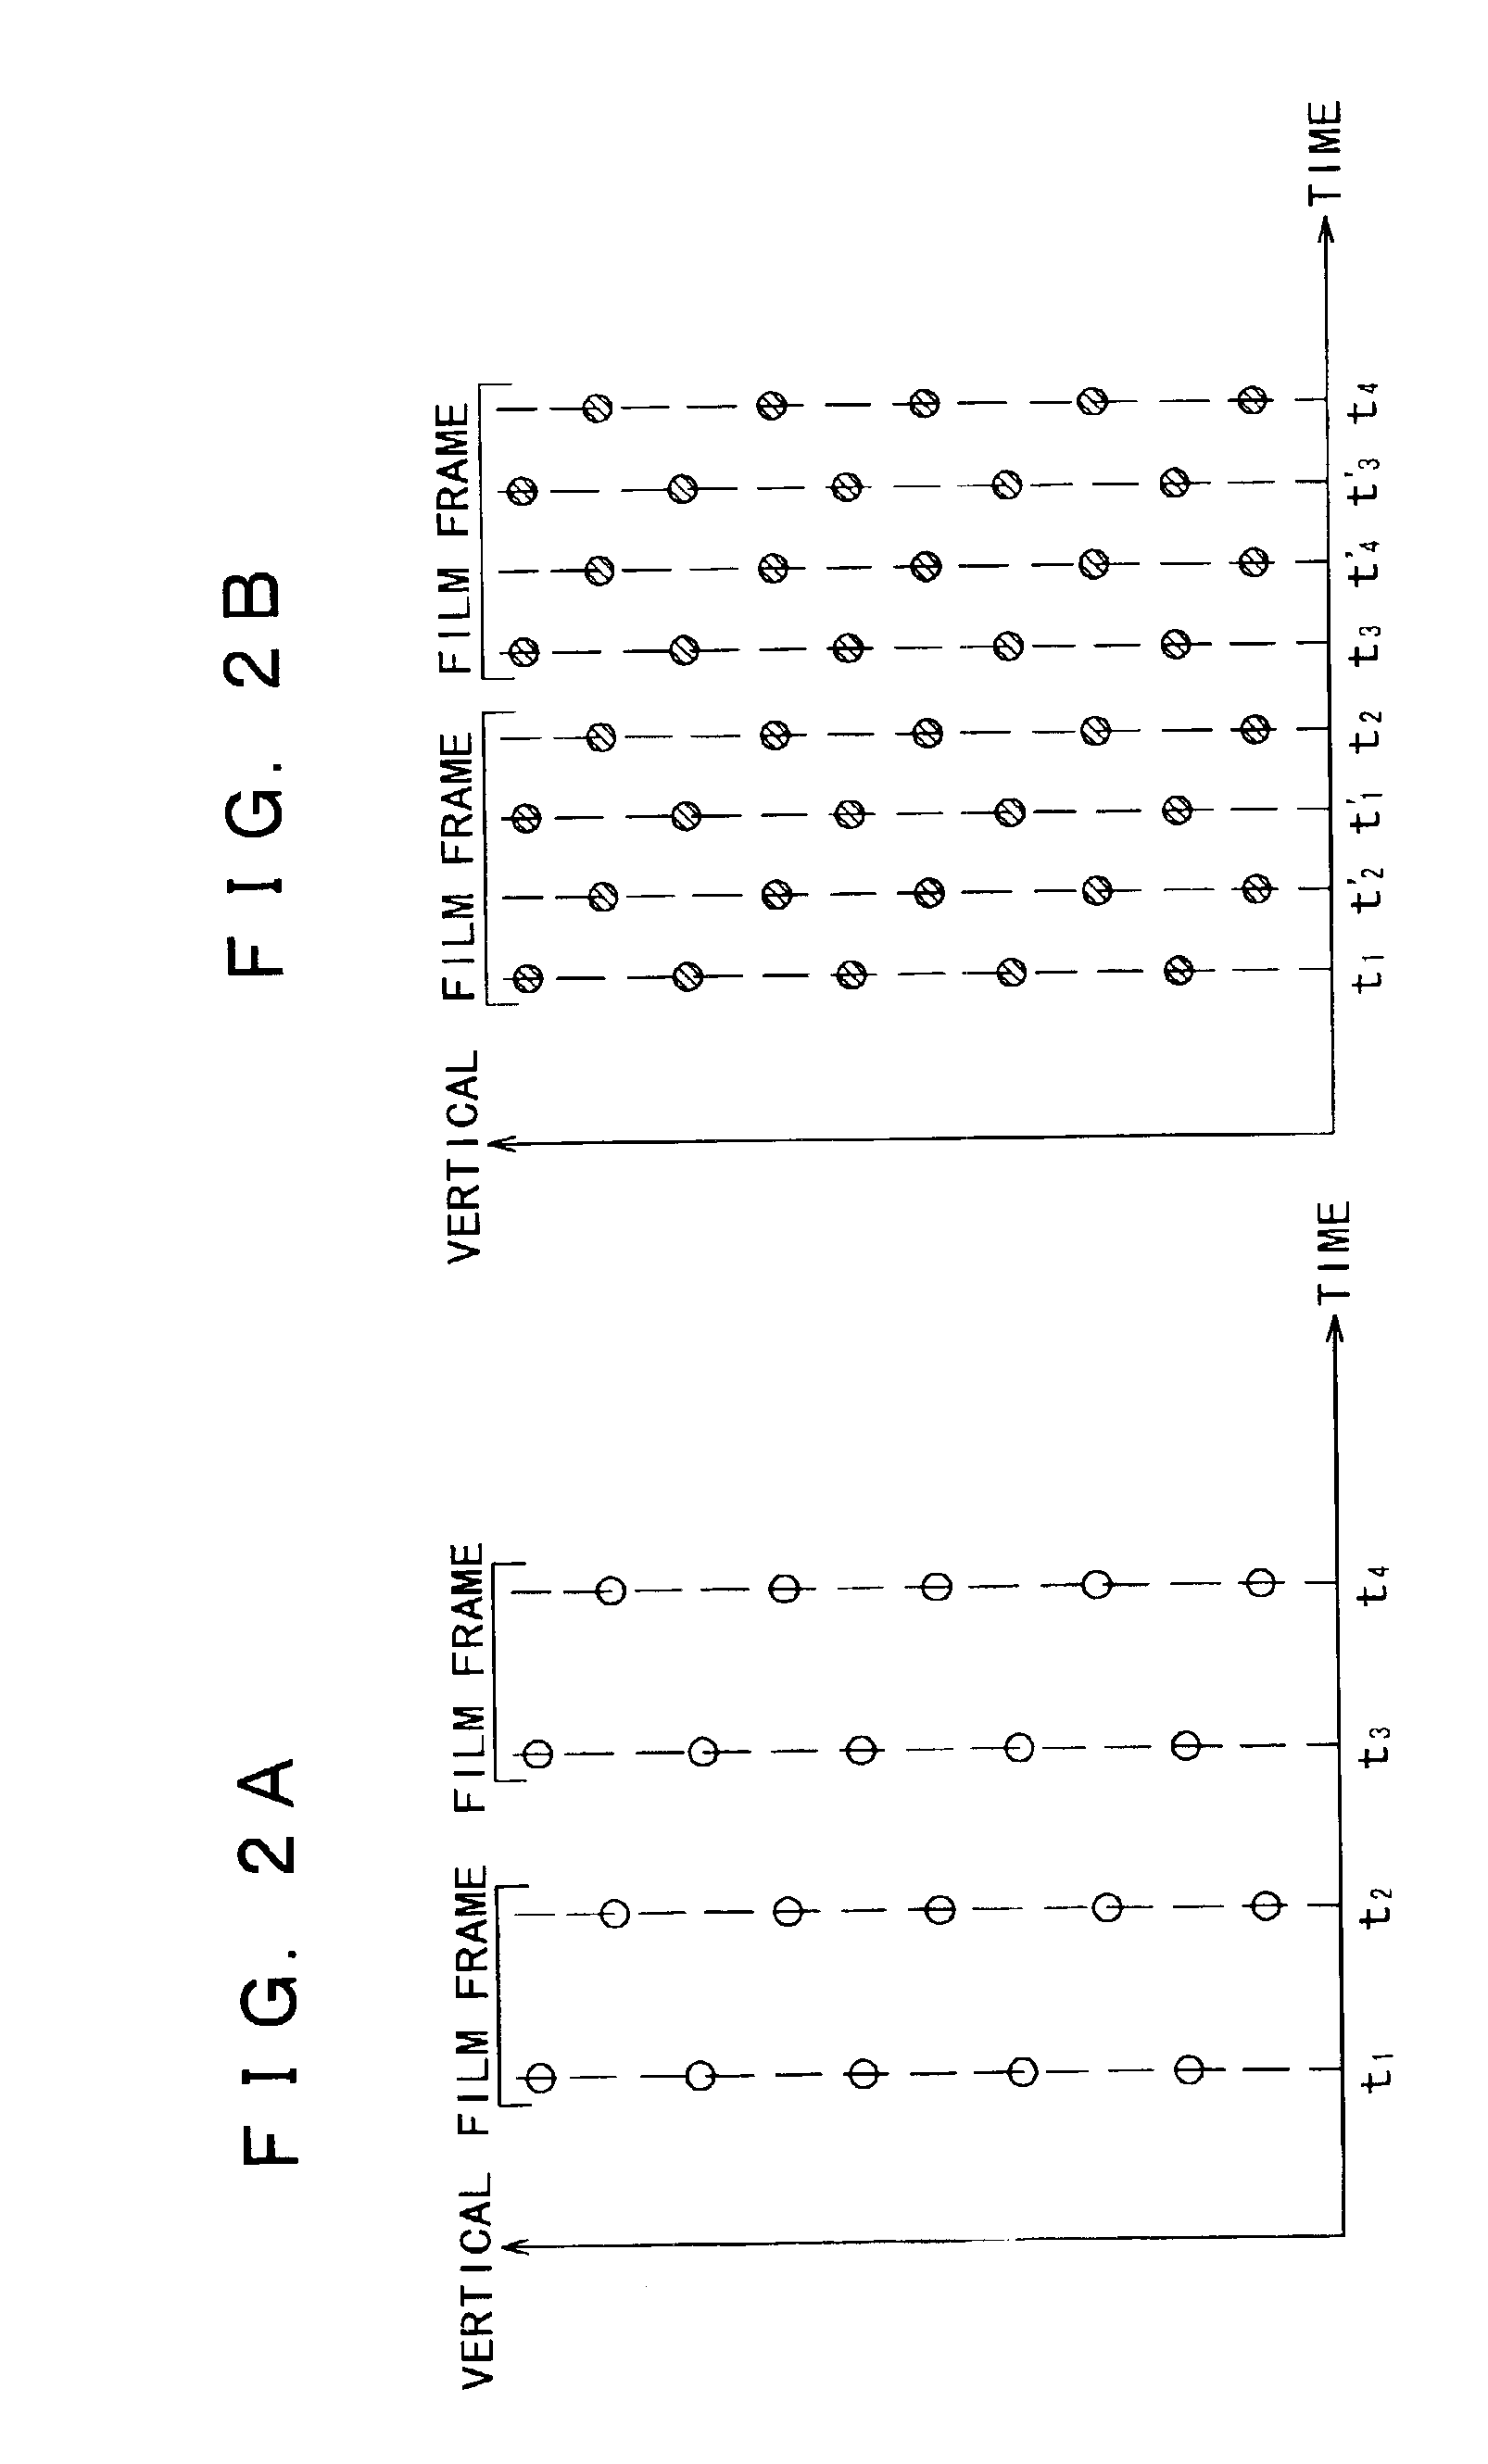 Image signal processing apparatus and method